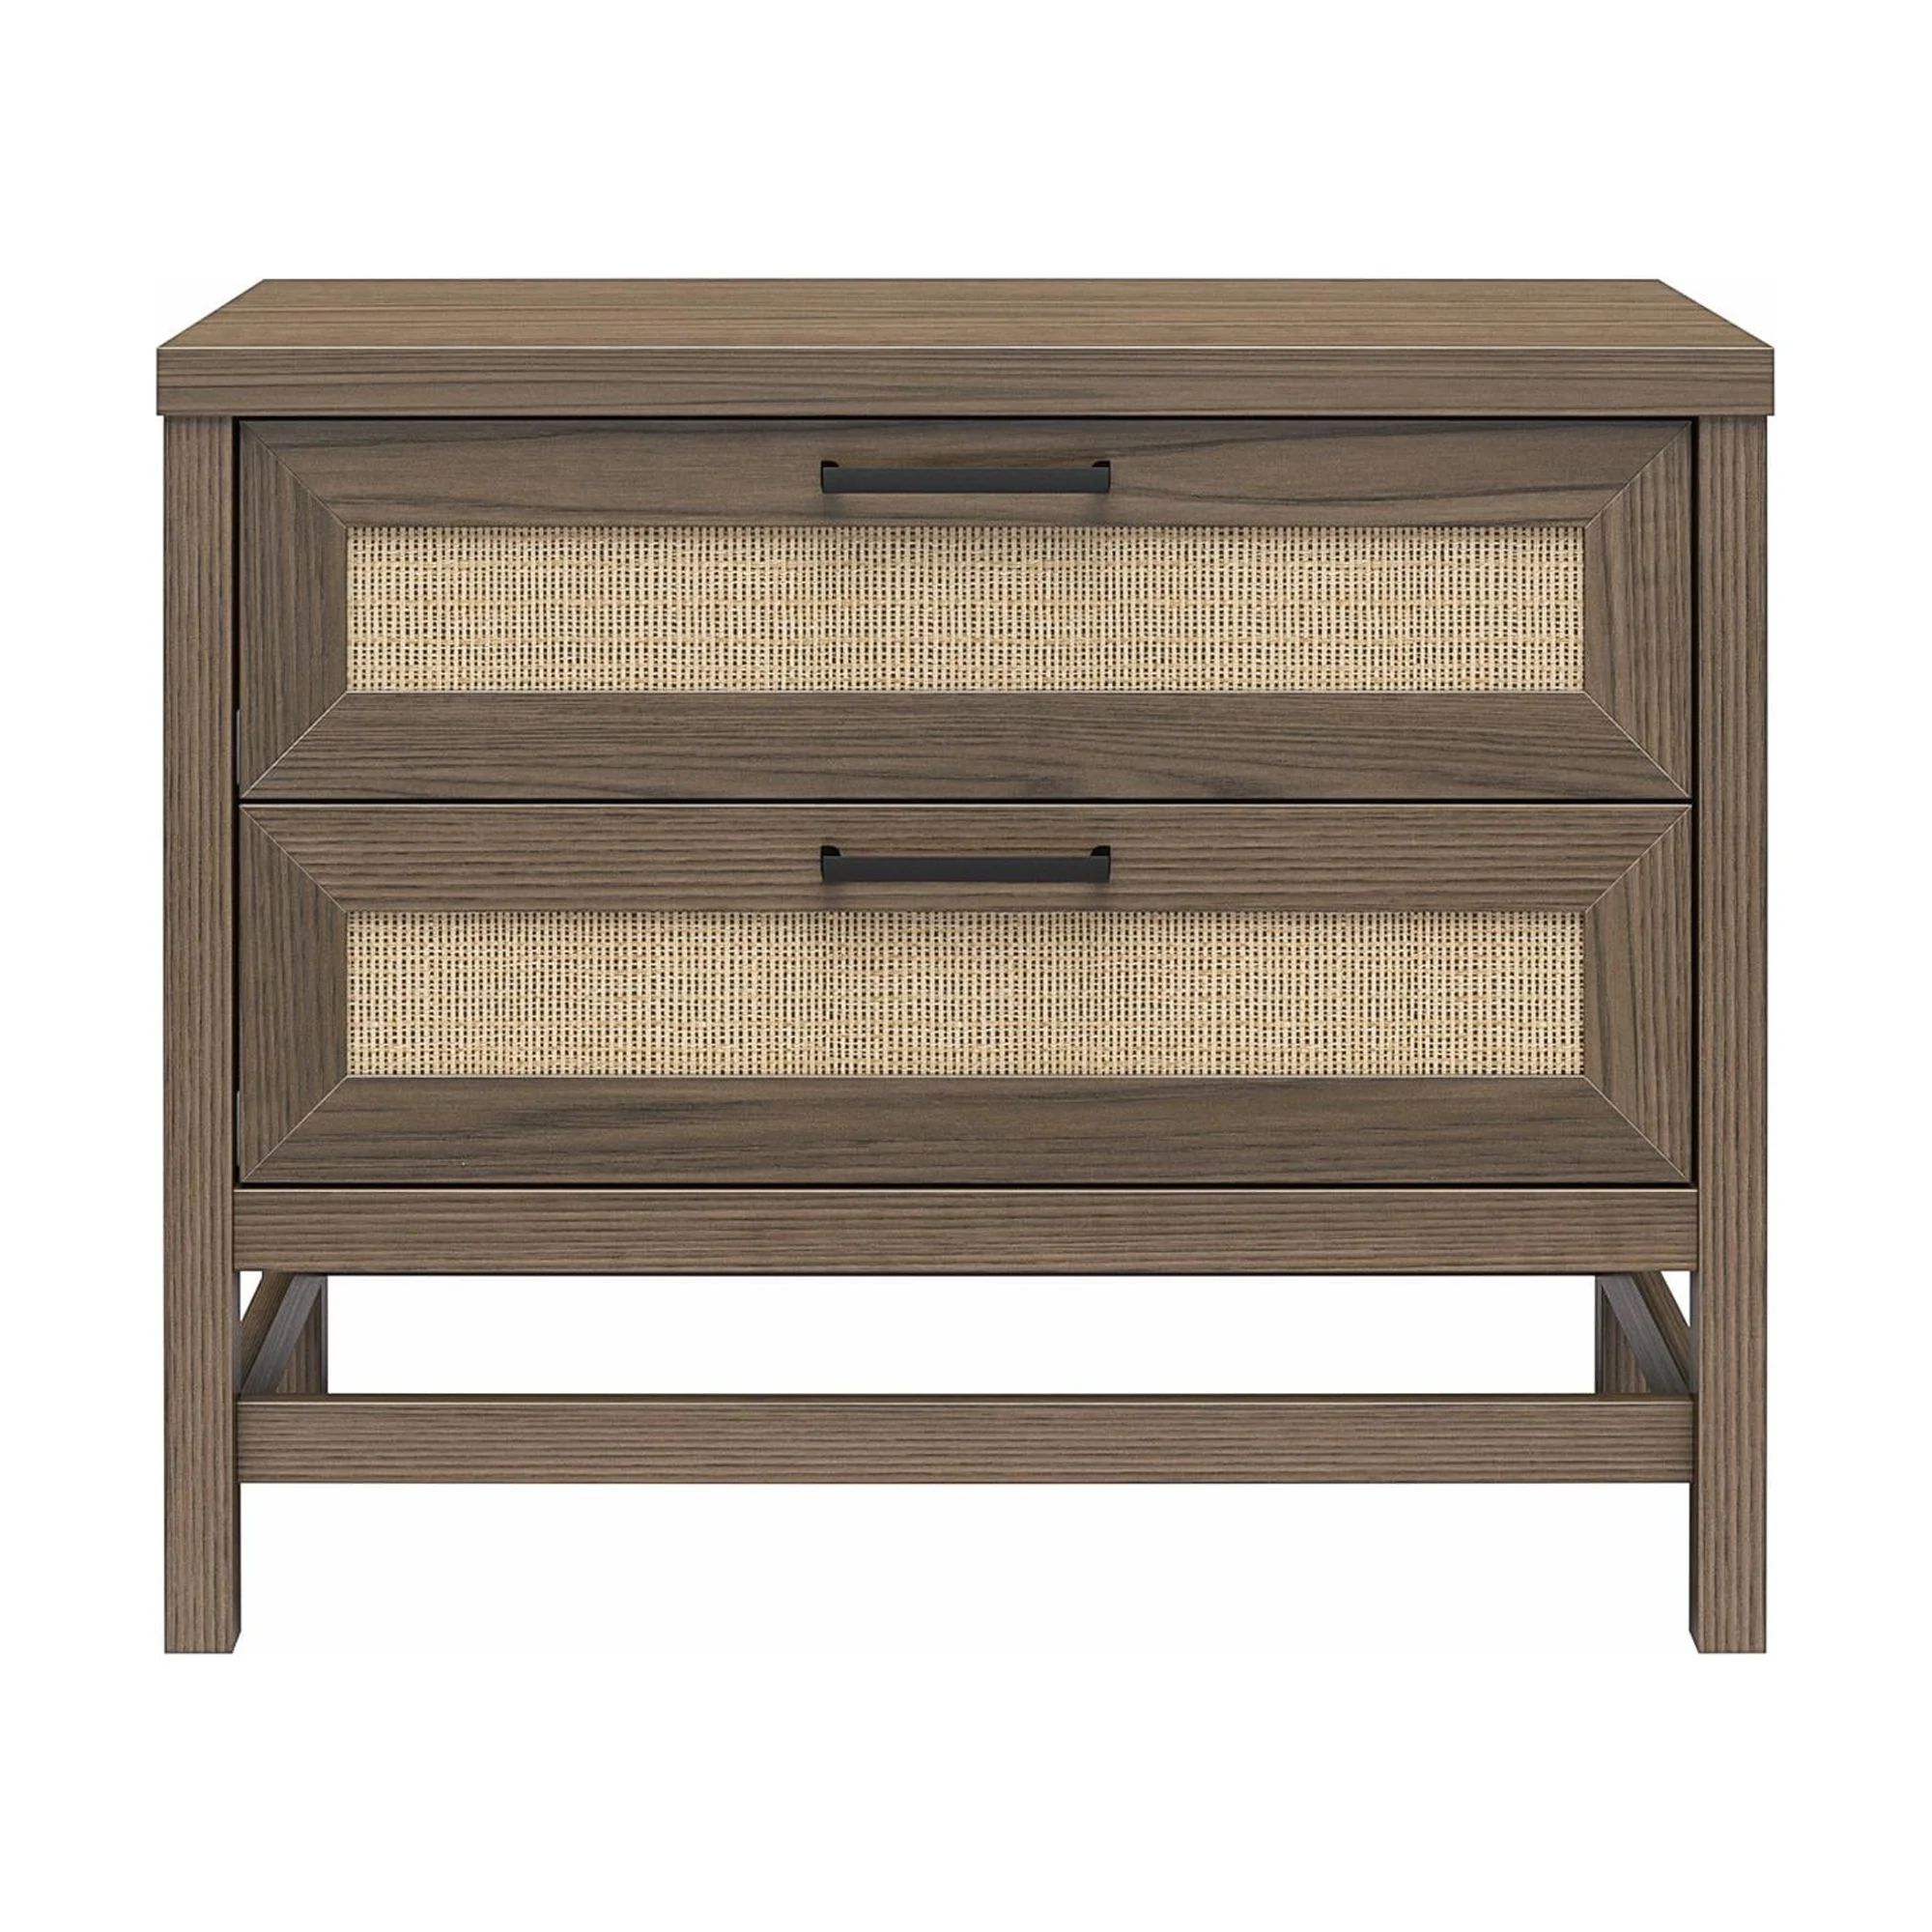 Ameriwood Home Lennon 2 Drawer Nightstand, Medium Brown and Faux Rattan | Walmart (US)